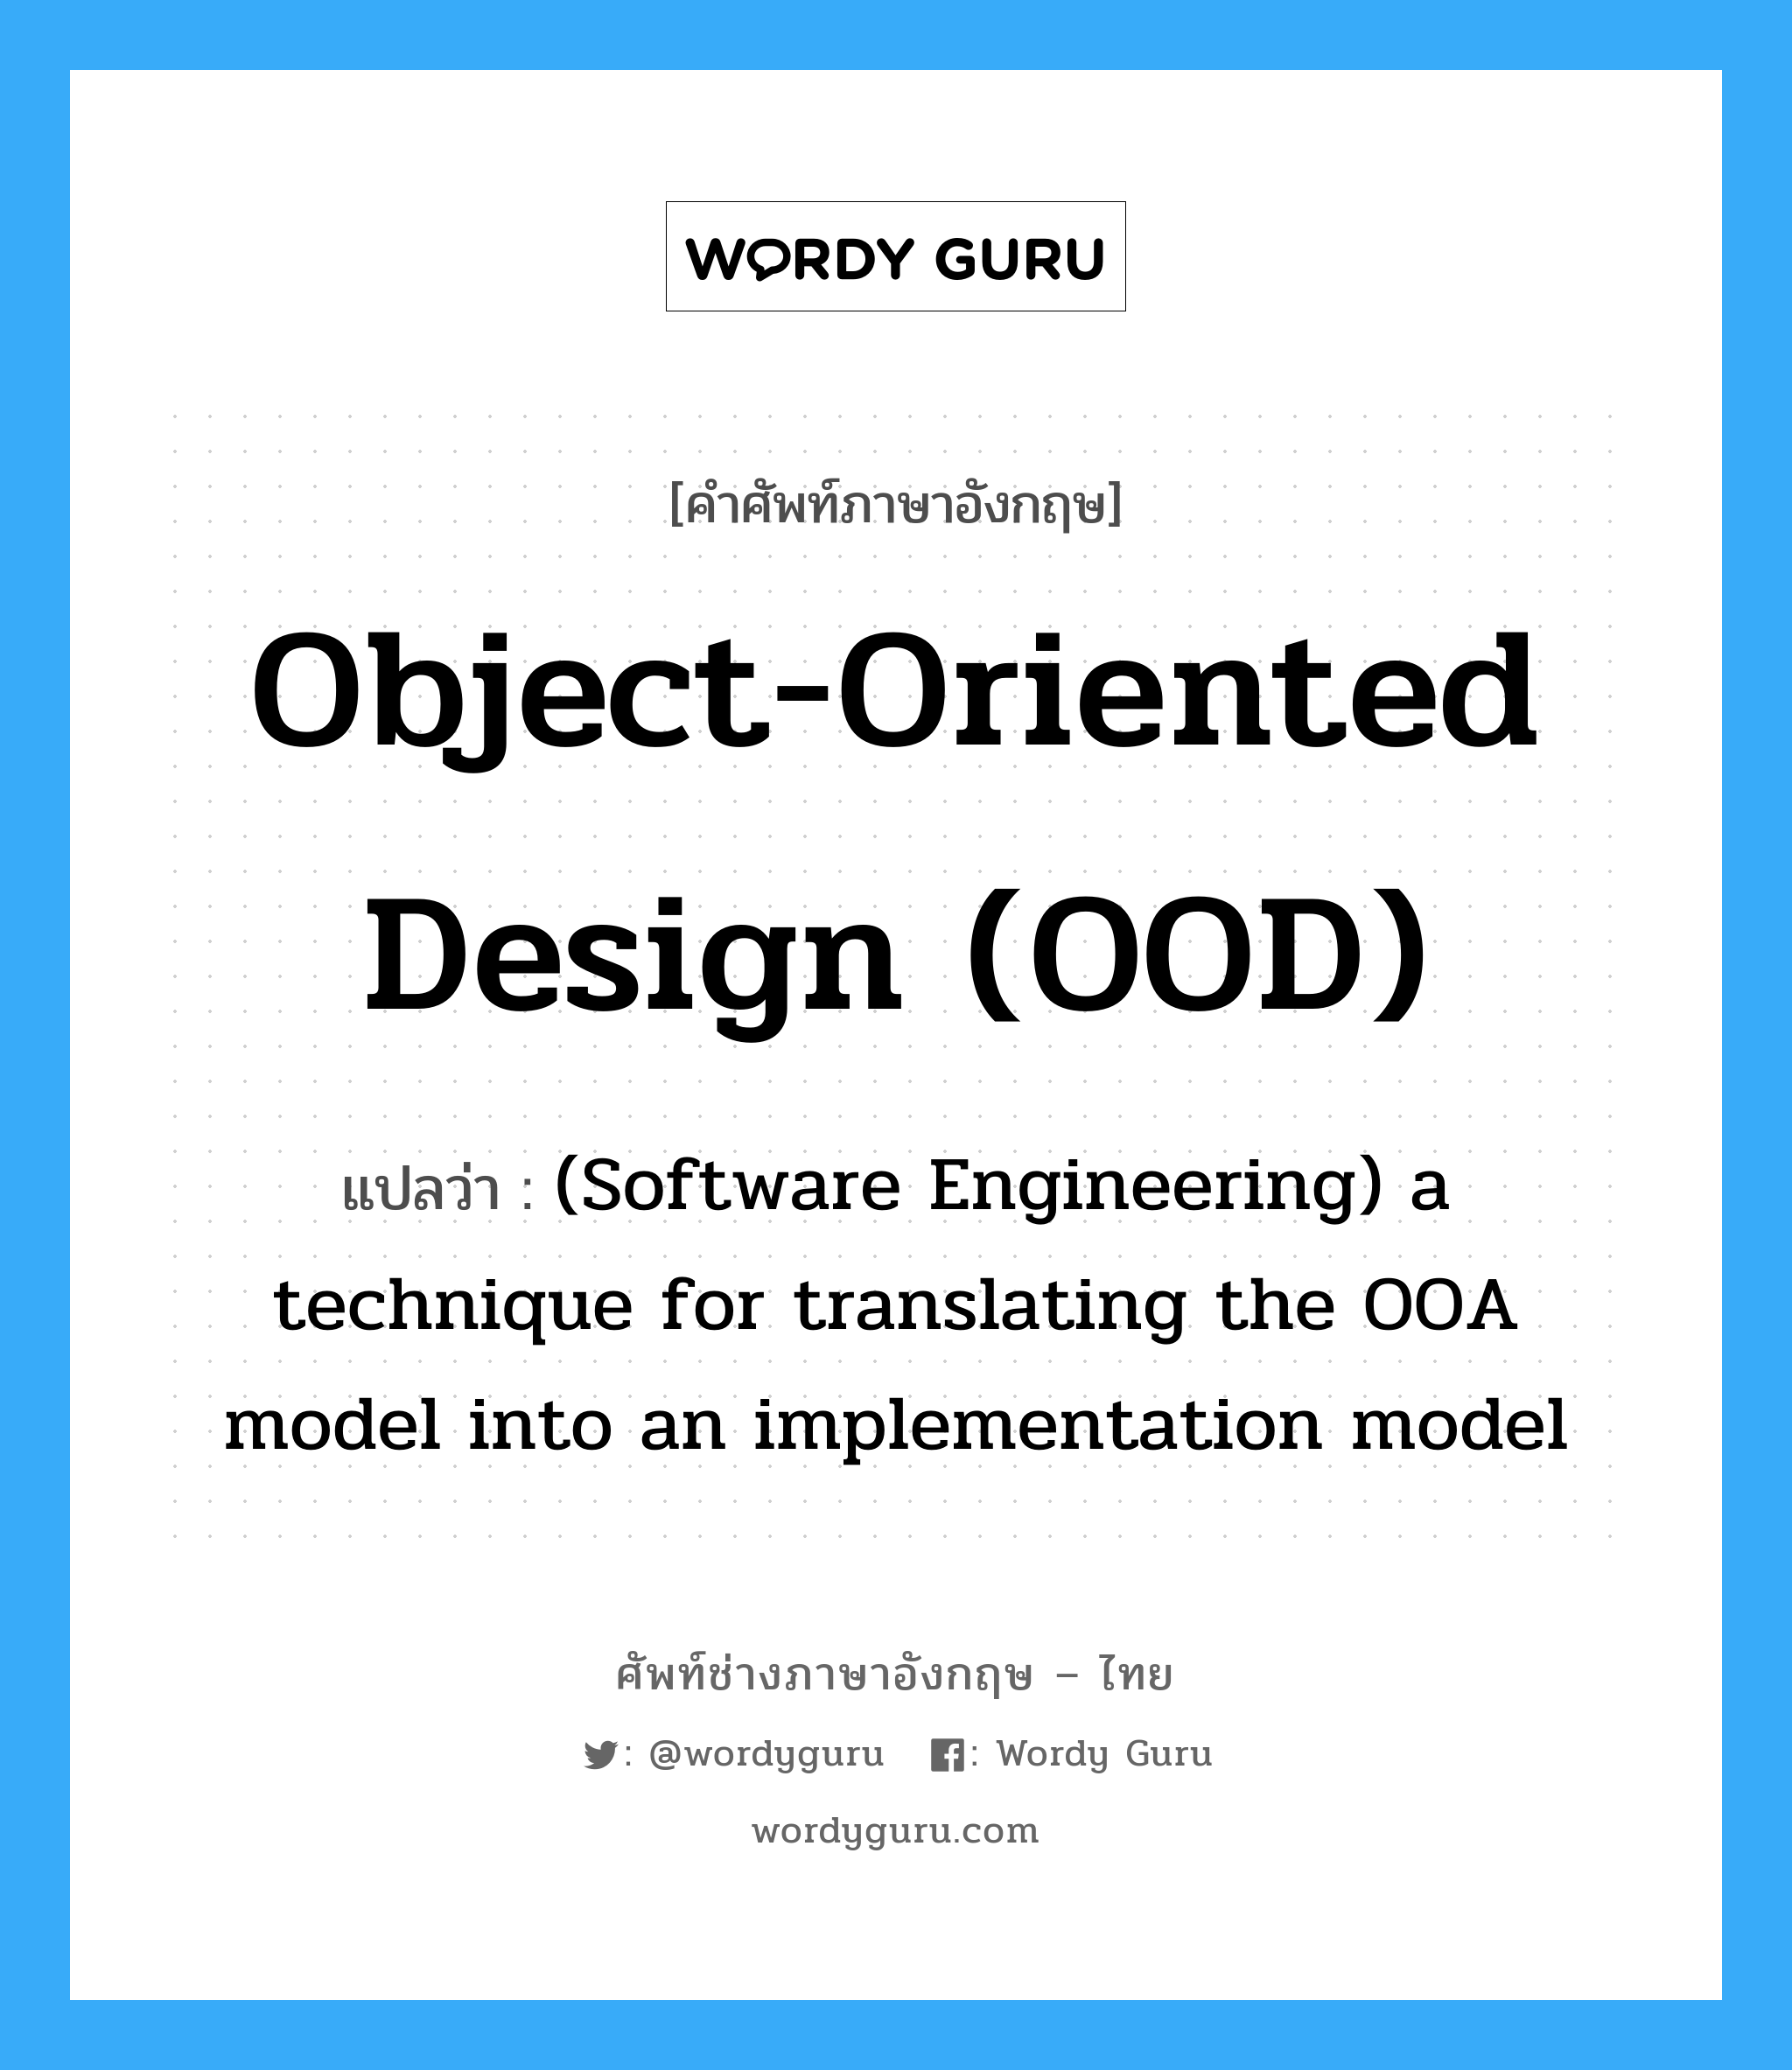 Object-oriented design (OOD) แปลว่า?, คำศัพท์ช่างภาษาอังกฤษ - ไทย Object-oriented design (OOD) คำศัพท์ภาษาอังกฤษ Object-oriented design (OOD) แปลว่า (Software Engineering) a technique for translating the OOA model into an implementation model